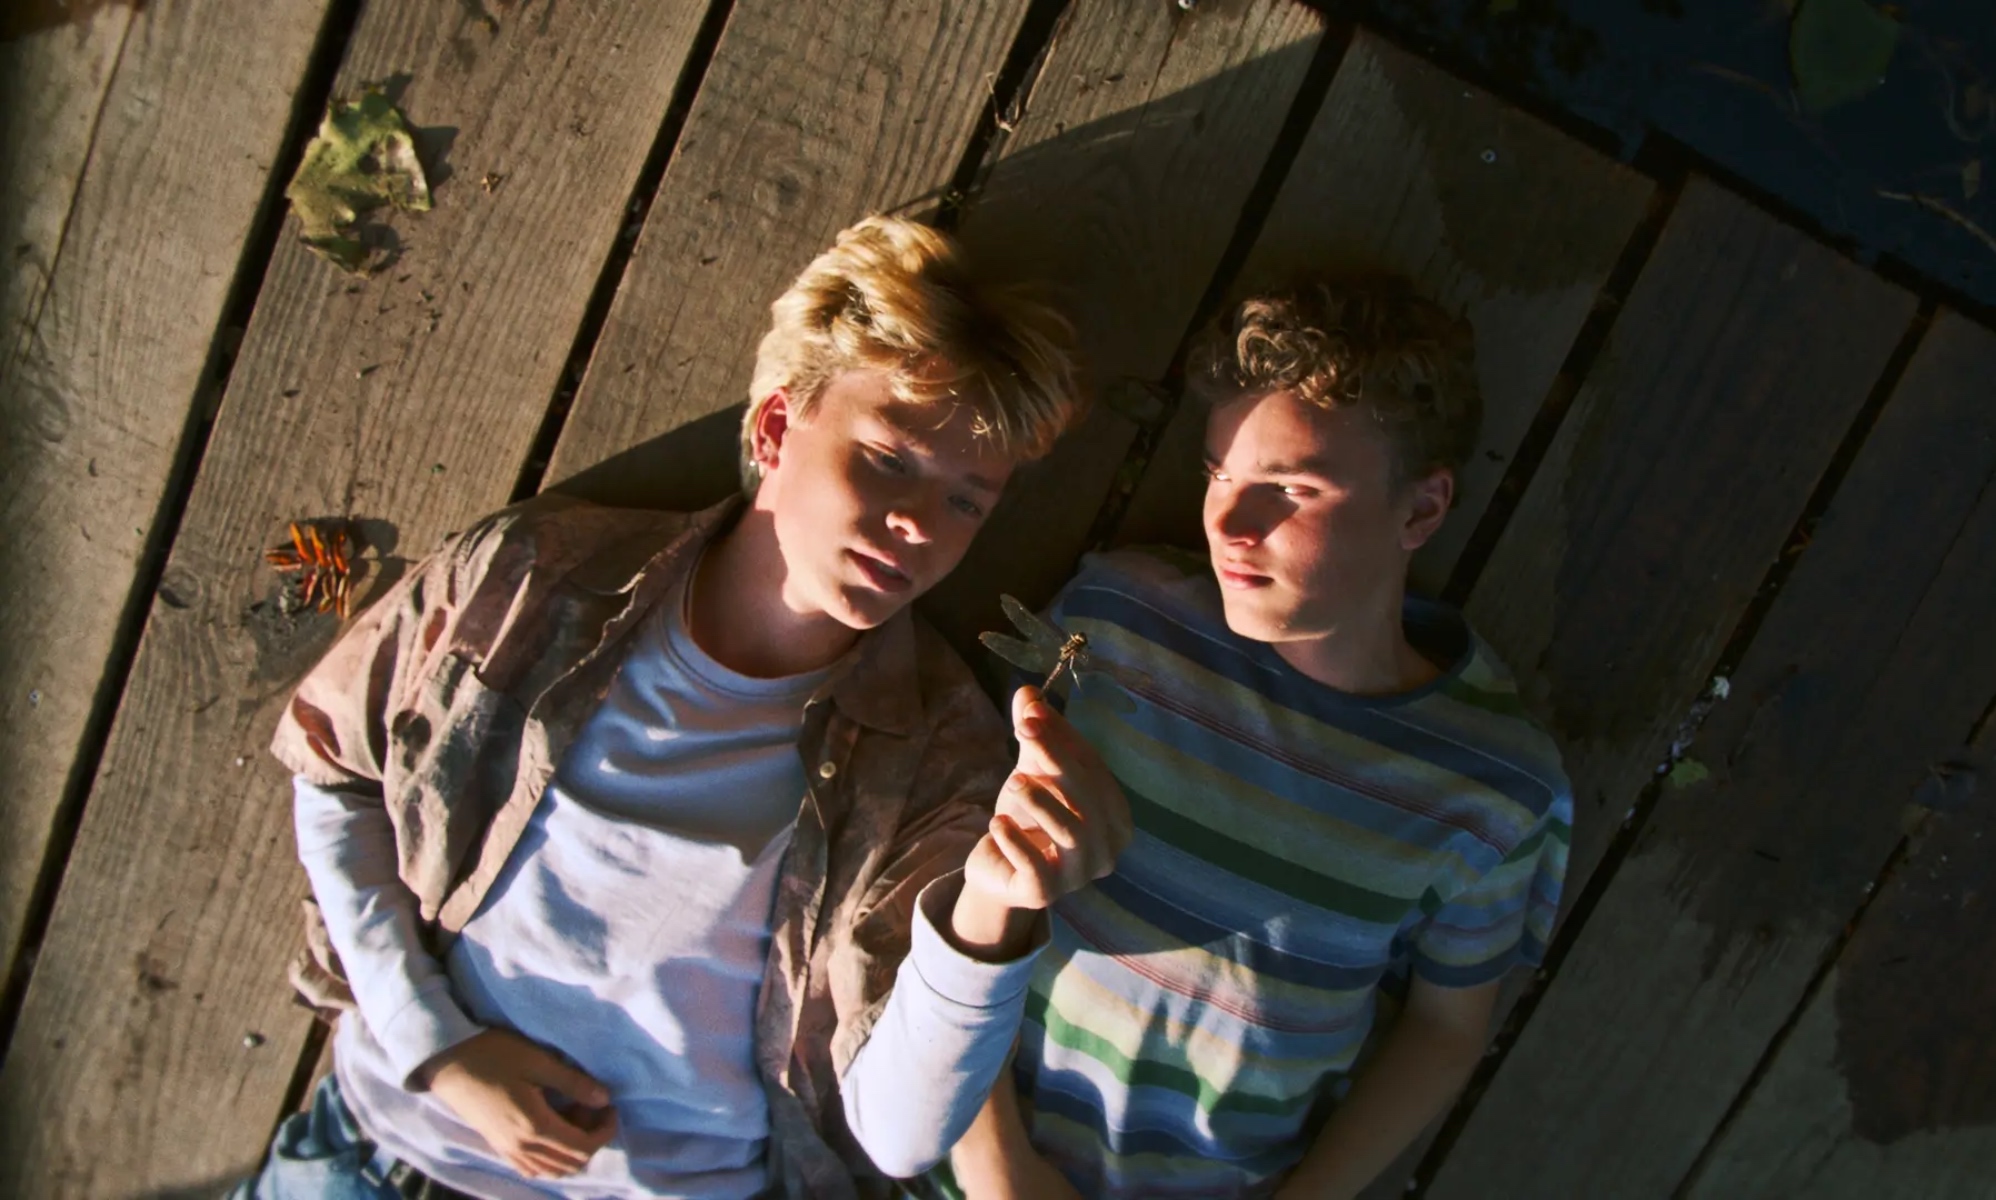 Gay Danish series One of the Boys is a must-watch this Pride